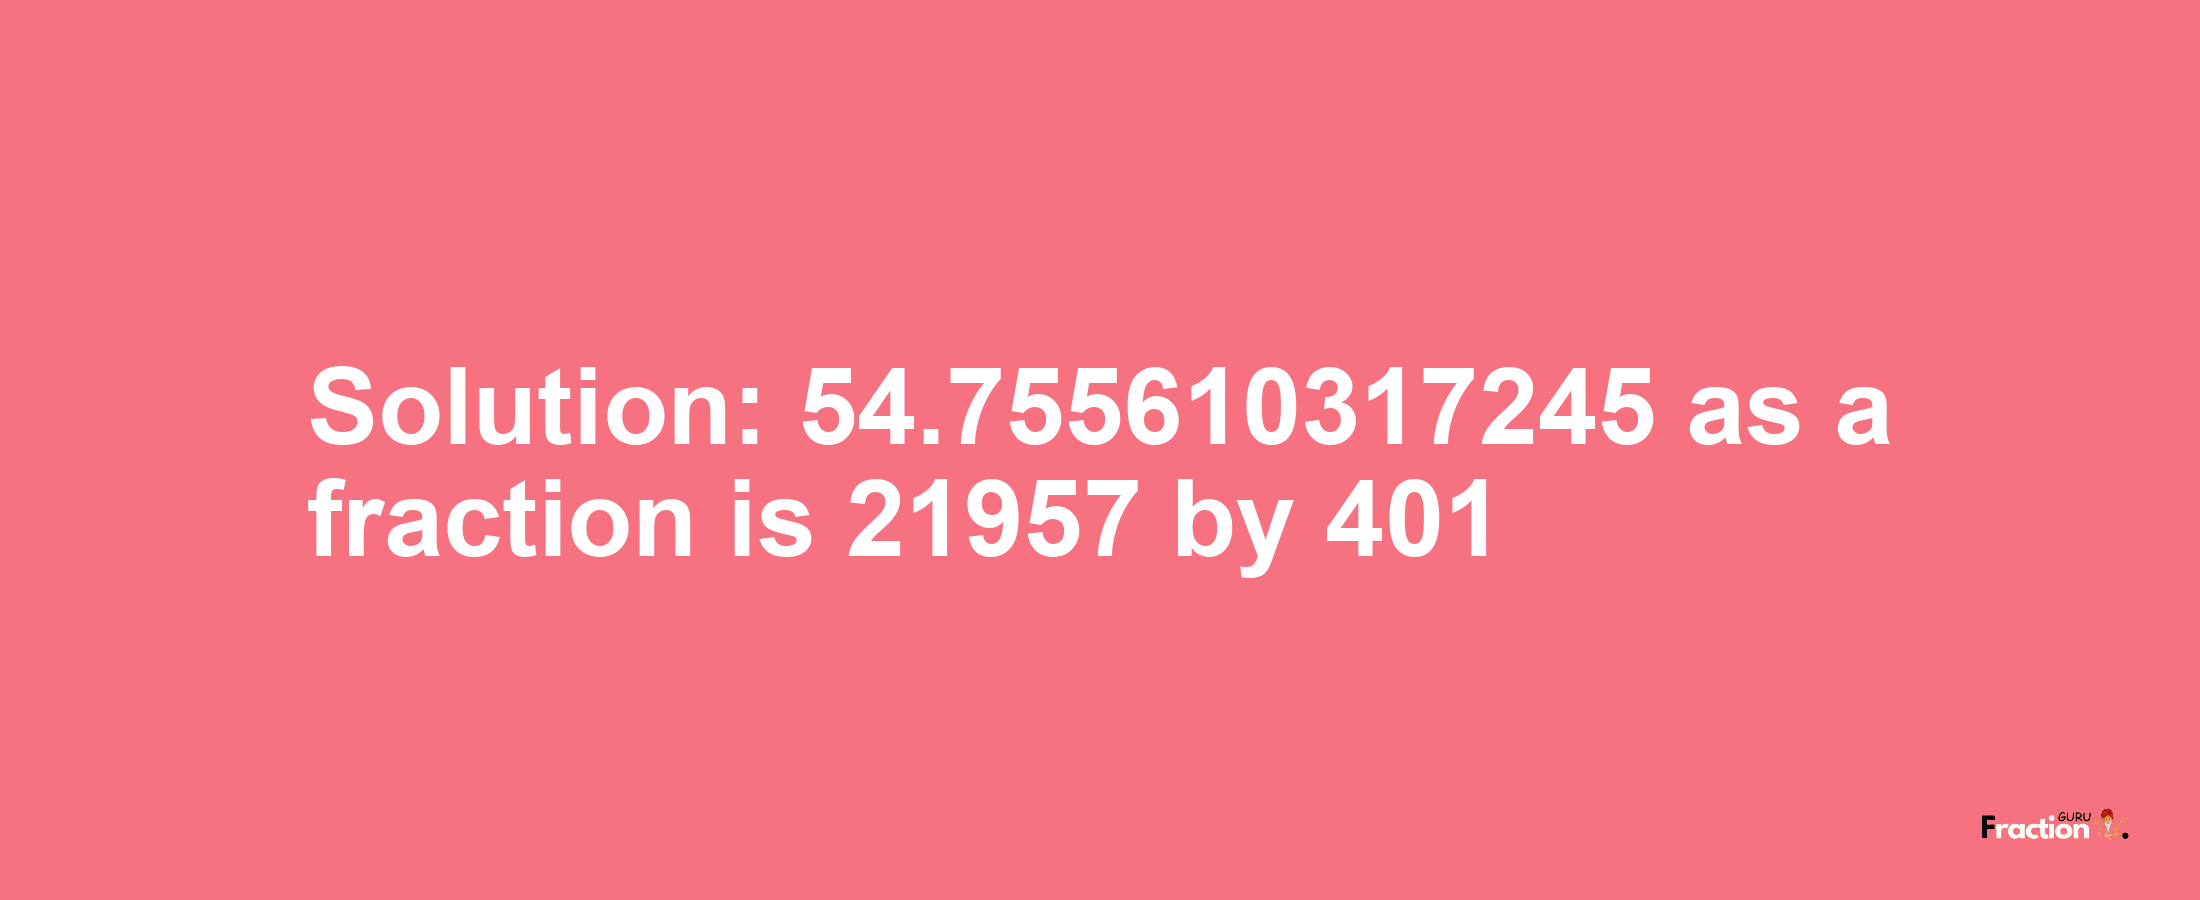 Solution:54.755610317245 as a fraction is 21957/401